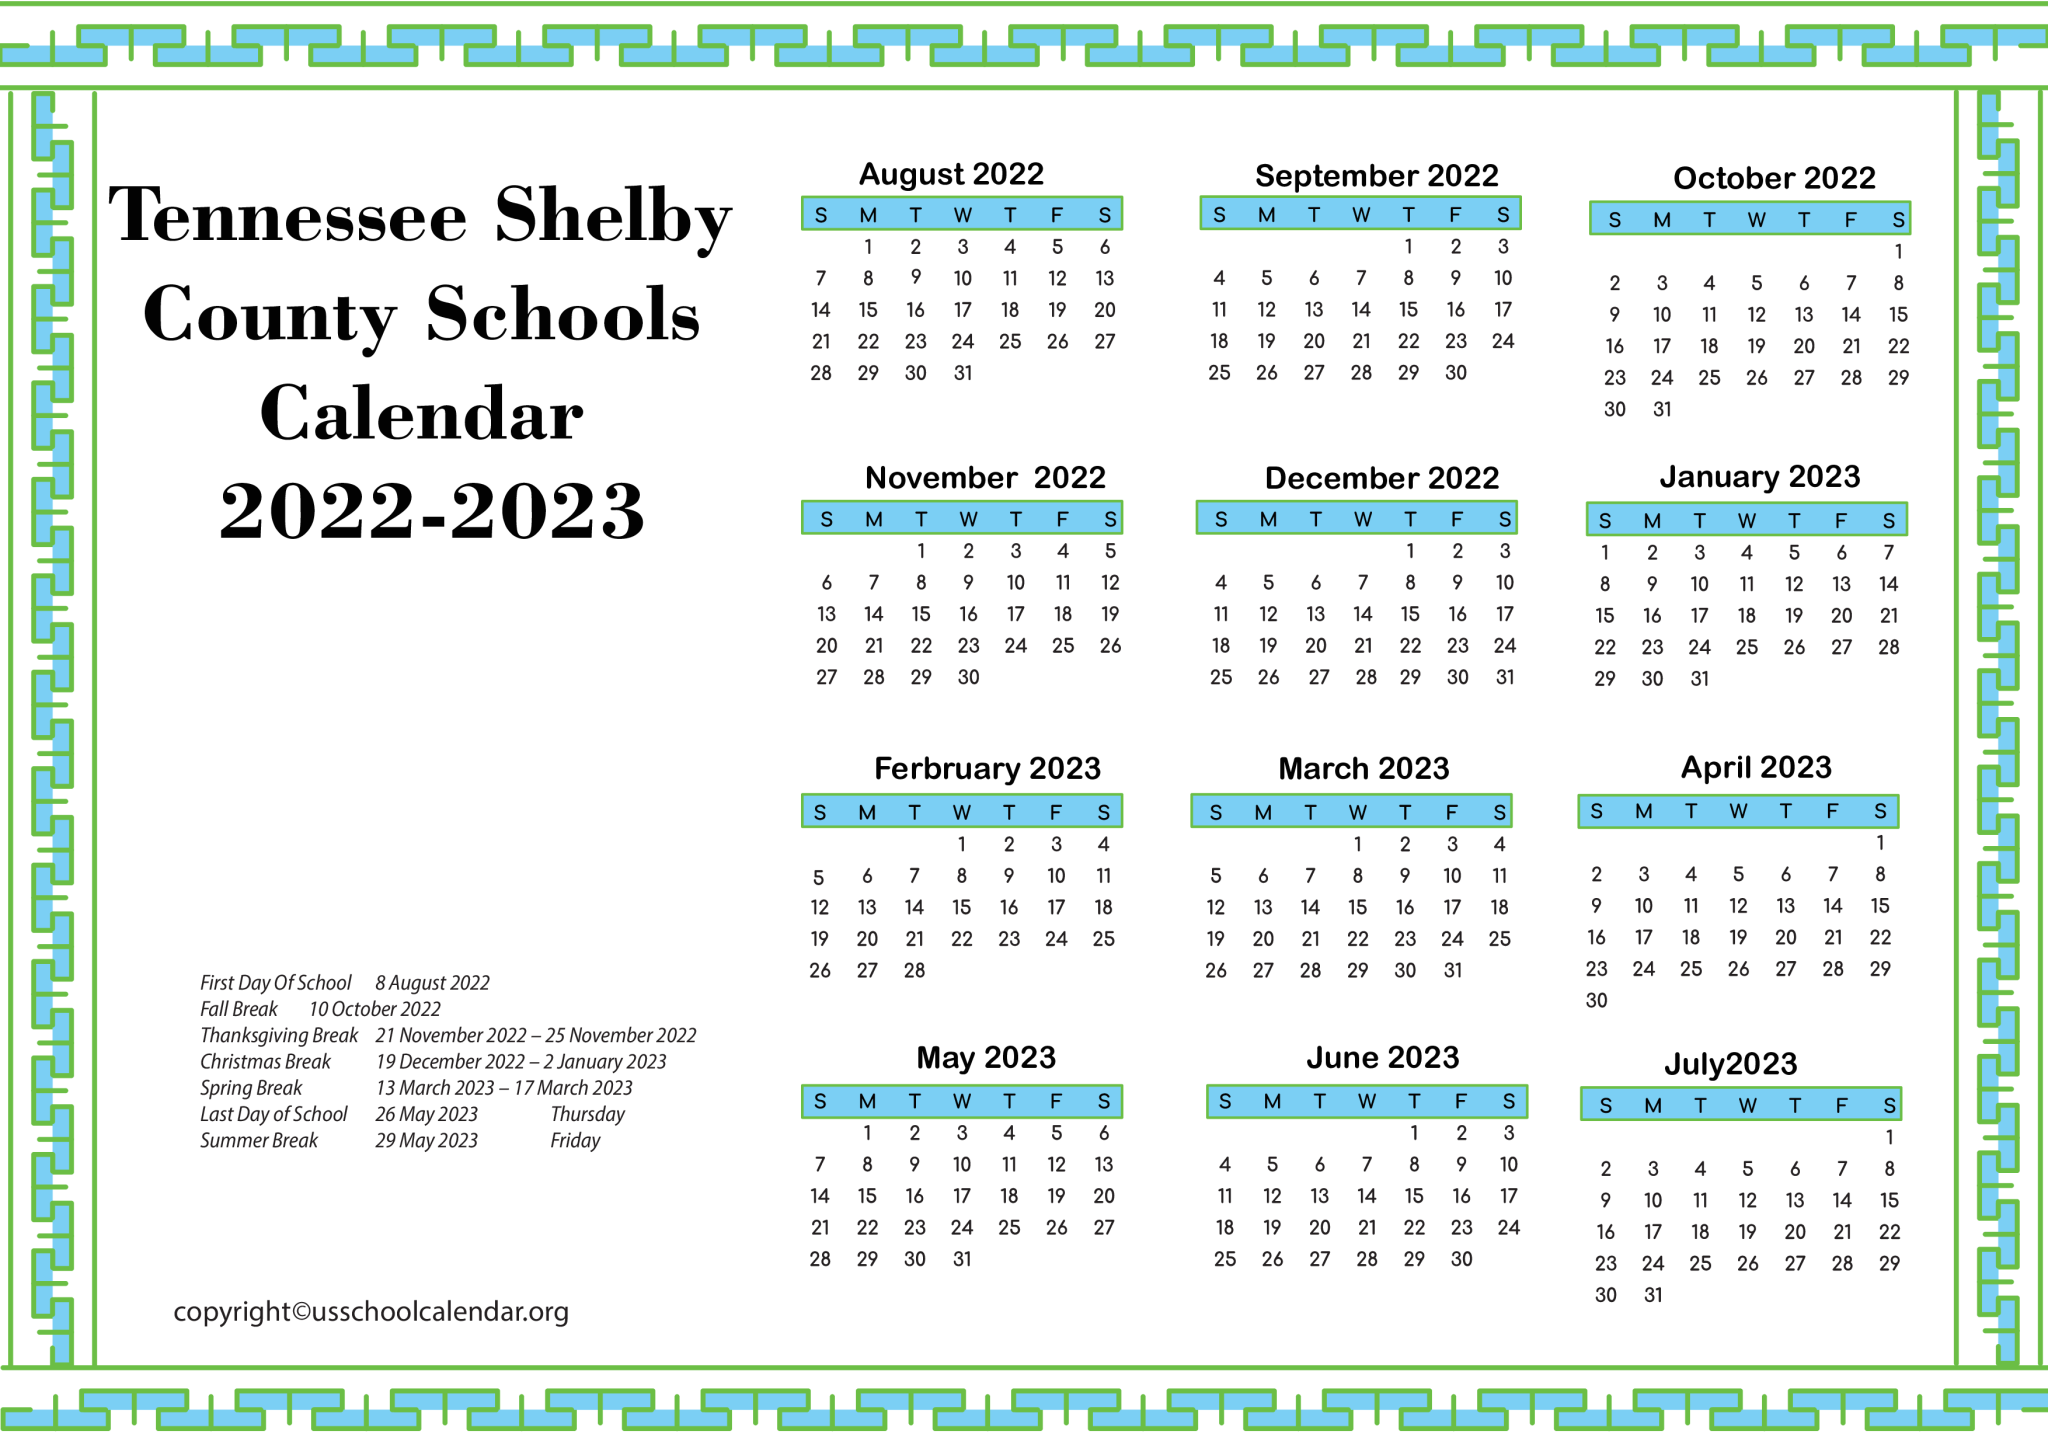 Tennessee Shelby County Schools Calendar 2022 2023